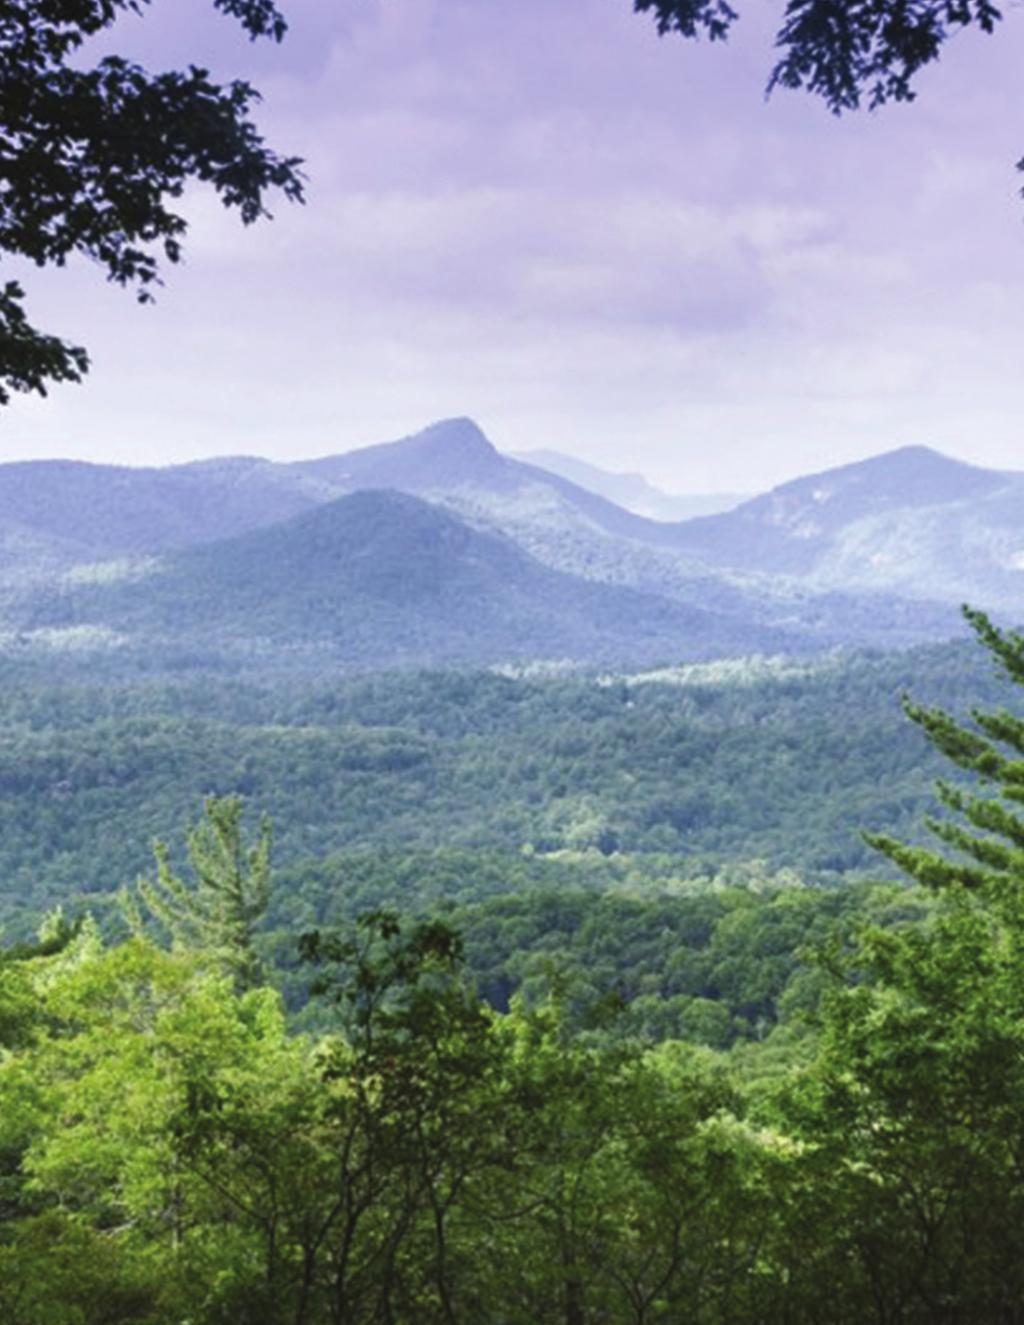 Mark your Calendar now for the 2016 FLABOTA Retreat and Board of Directors Meeting In beautiful Cashiers, North